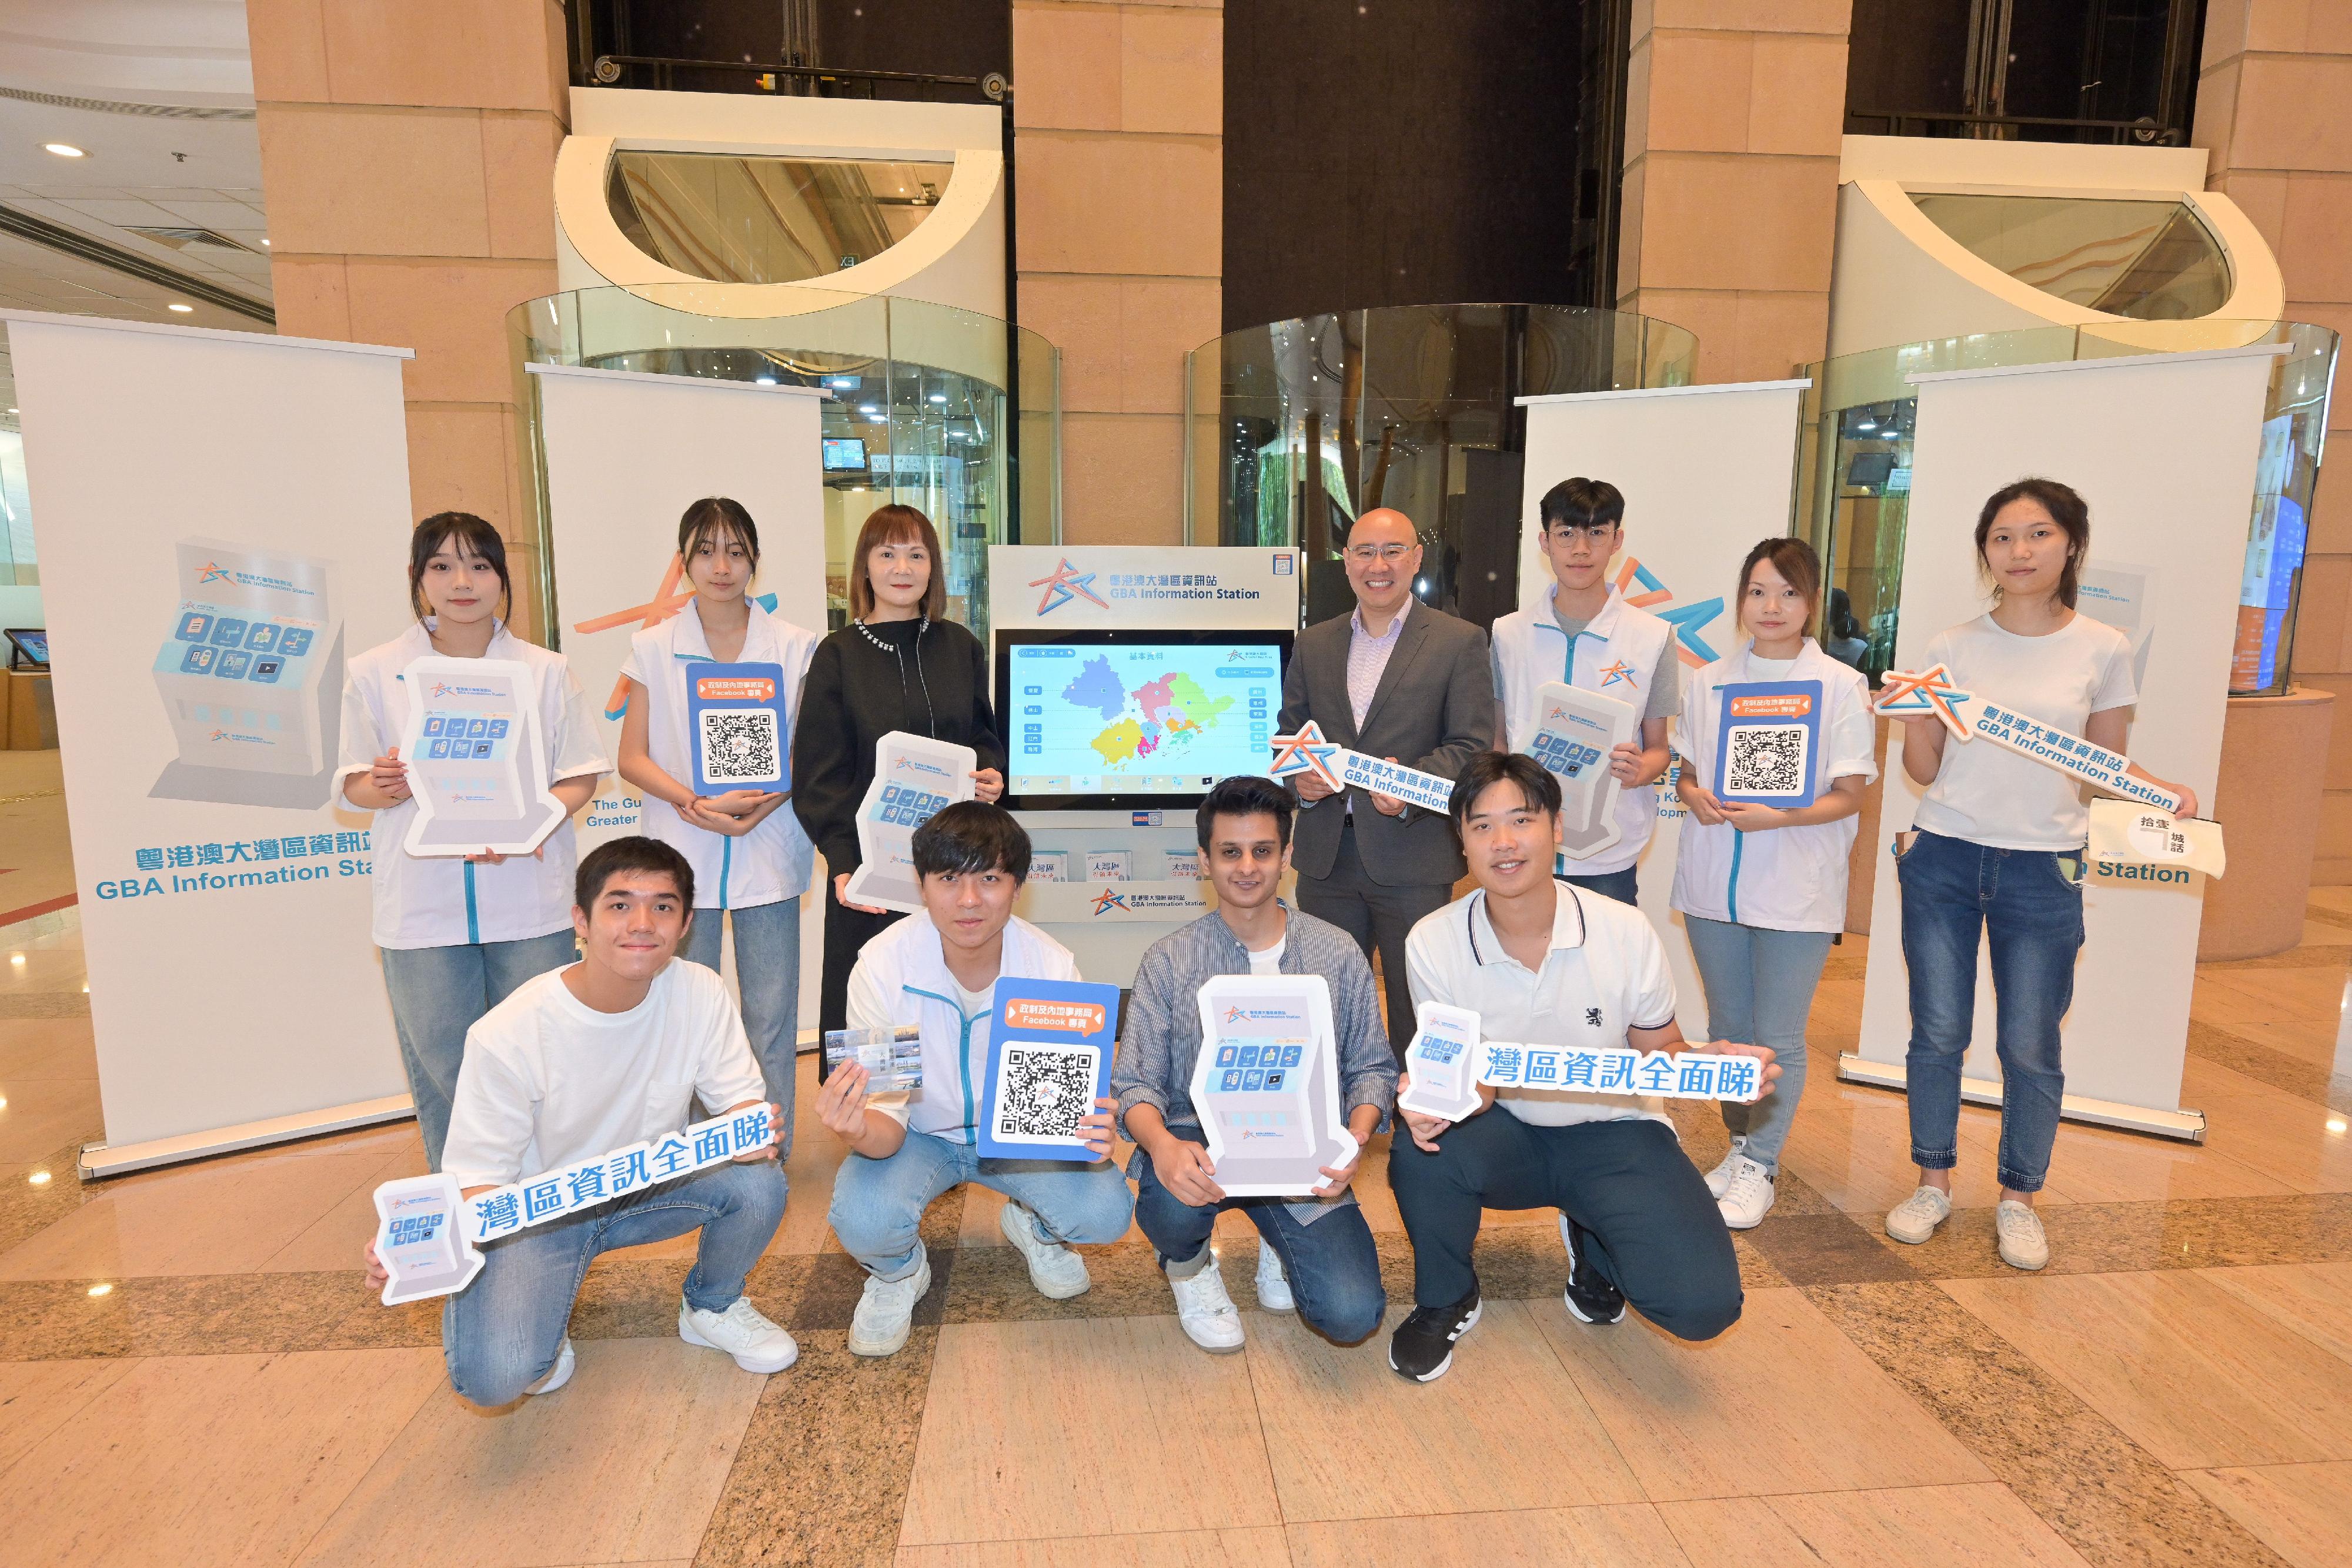 The Commissioner for the Development of the Guangdong-Hong Kong-Macao Greater Bay Area, Ms Maisie Chan (back row, third left), visits the Greater Bay Area Information Station located at the Hong Kong Central Library today (August 28) and is pictured with the youth ambassadors and staff members.